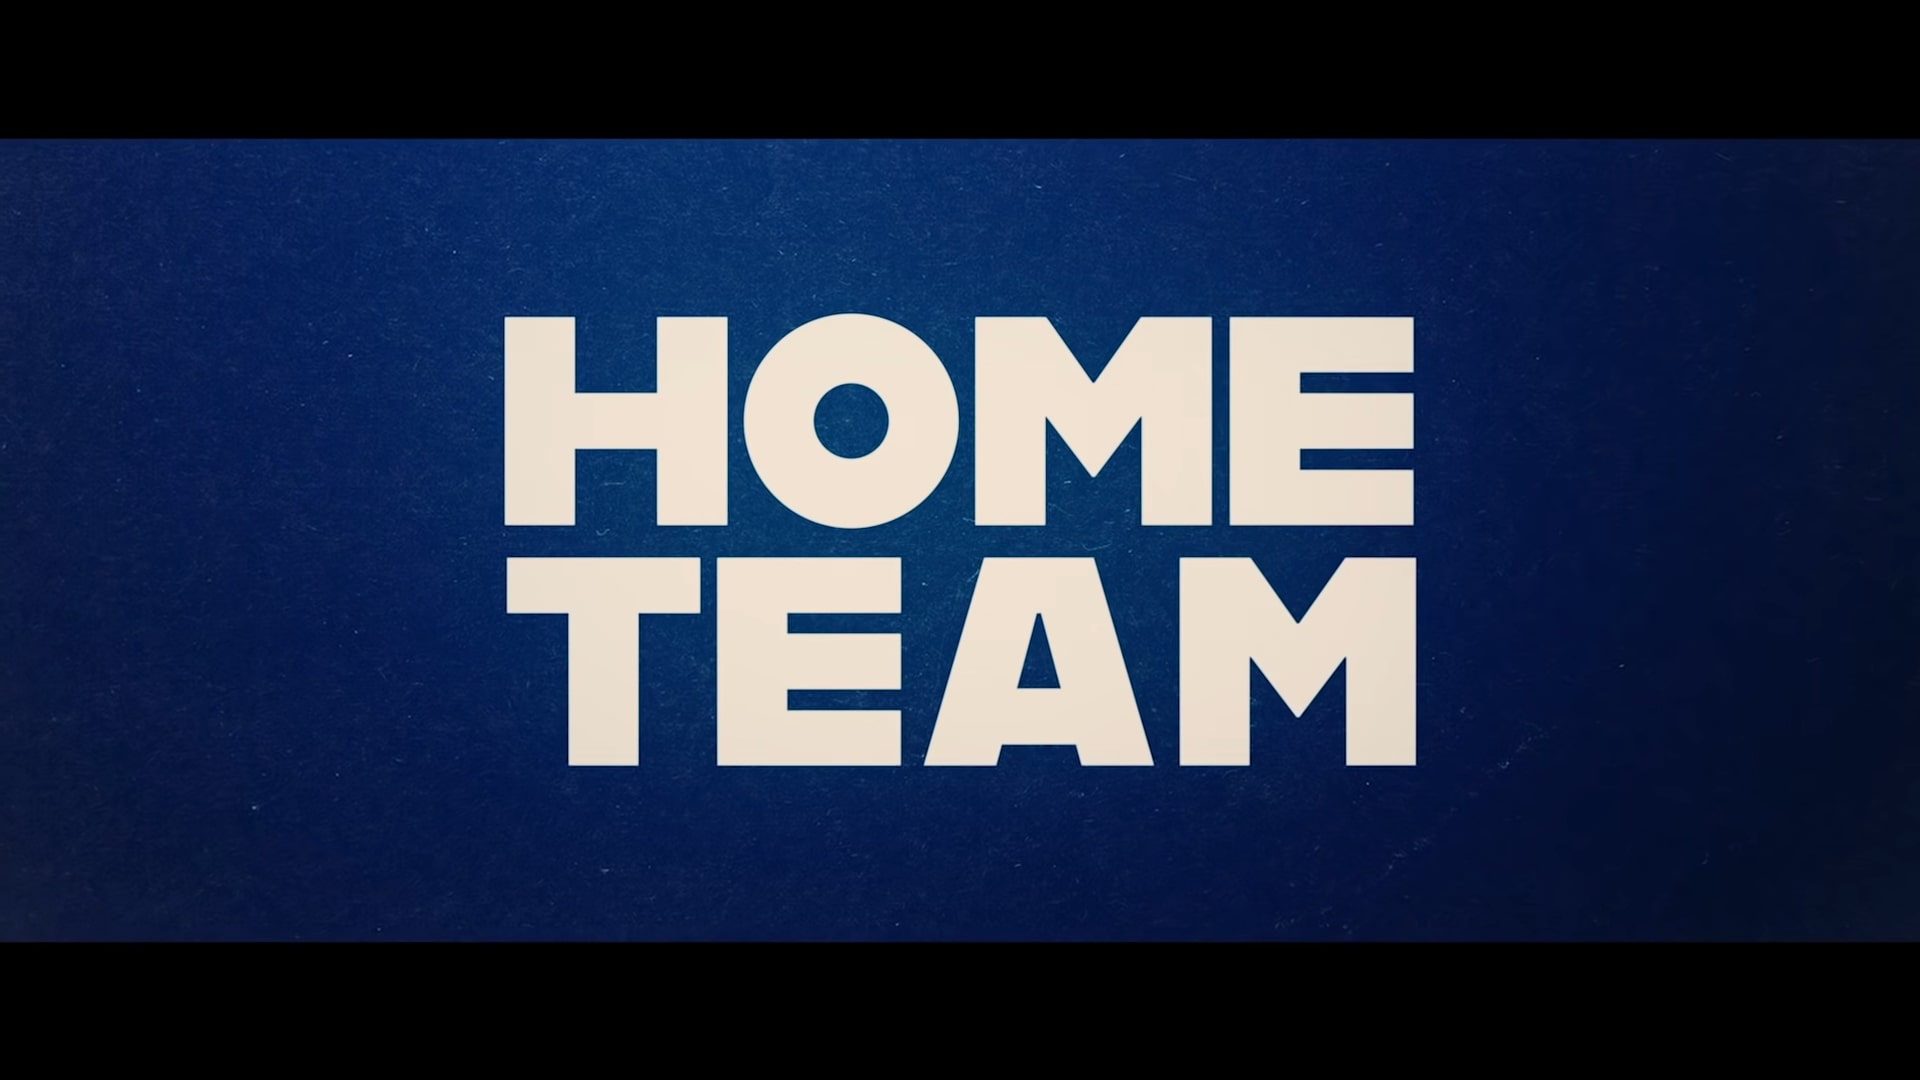 Netflix Home Team Trailer, Coming to Netflix in January 2022